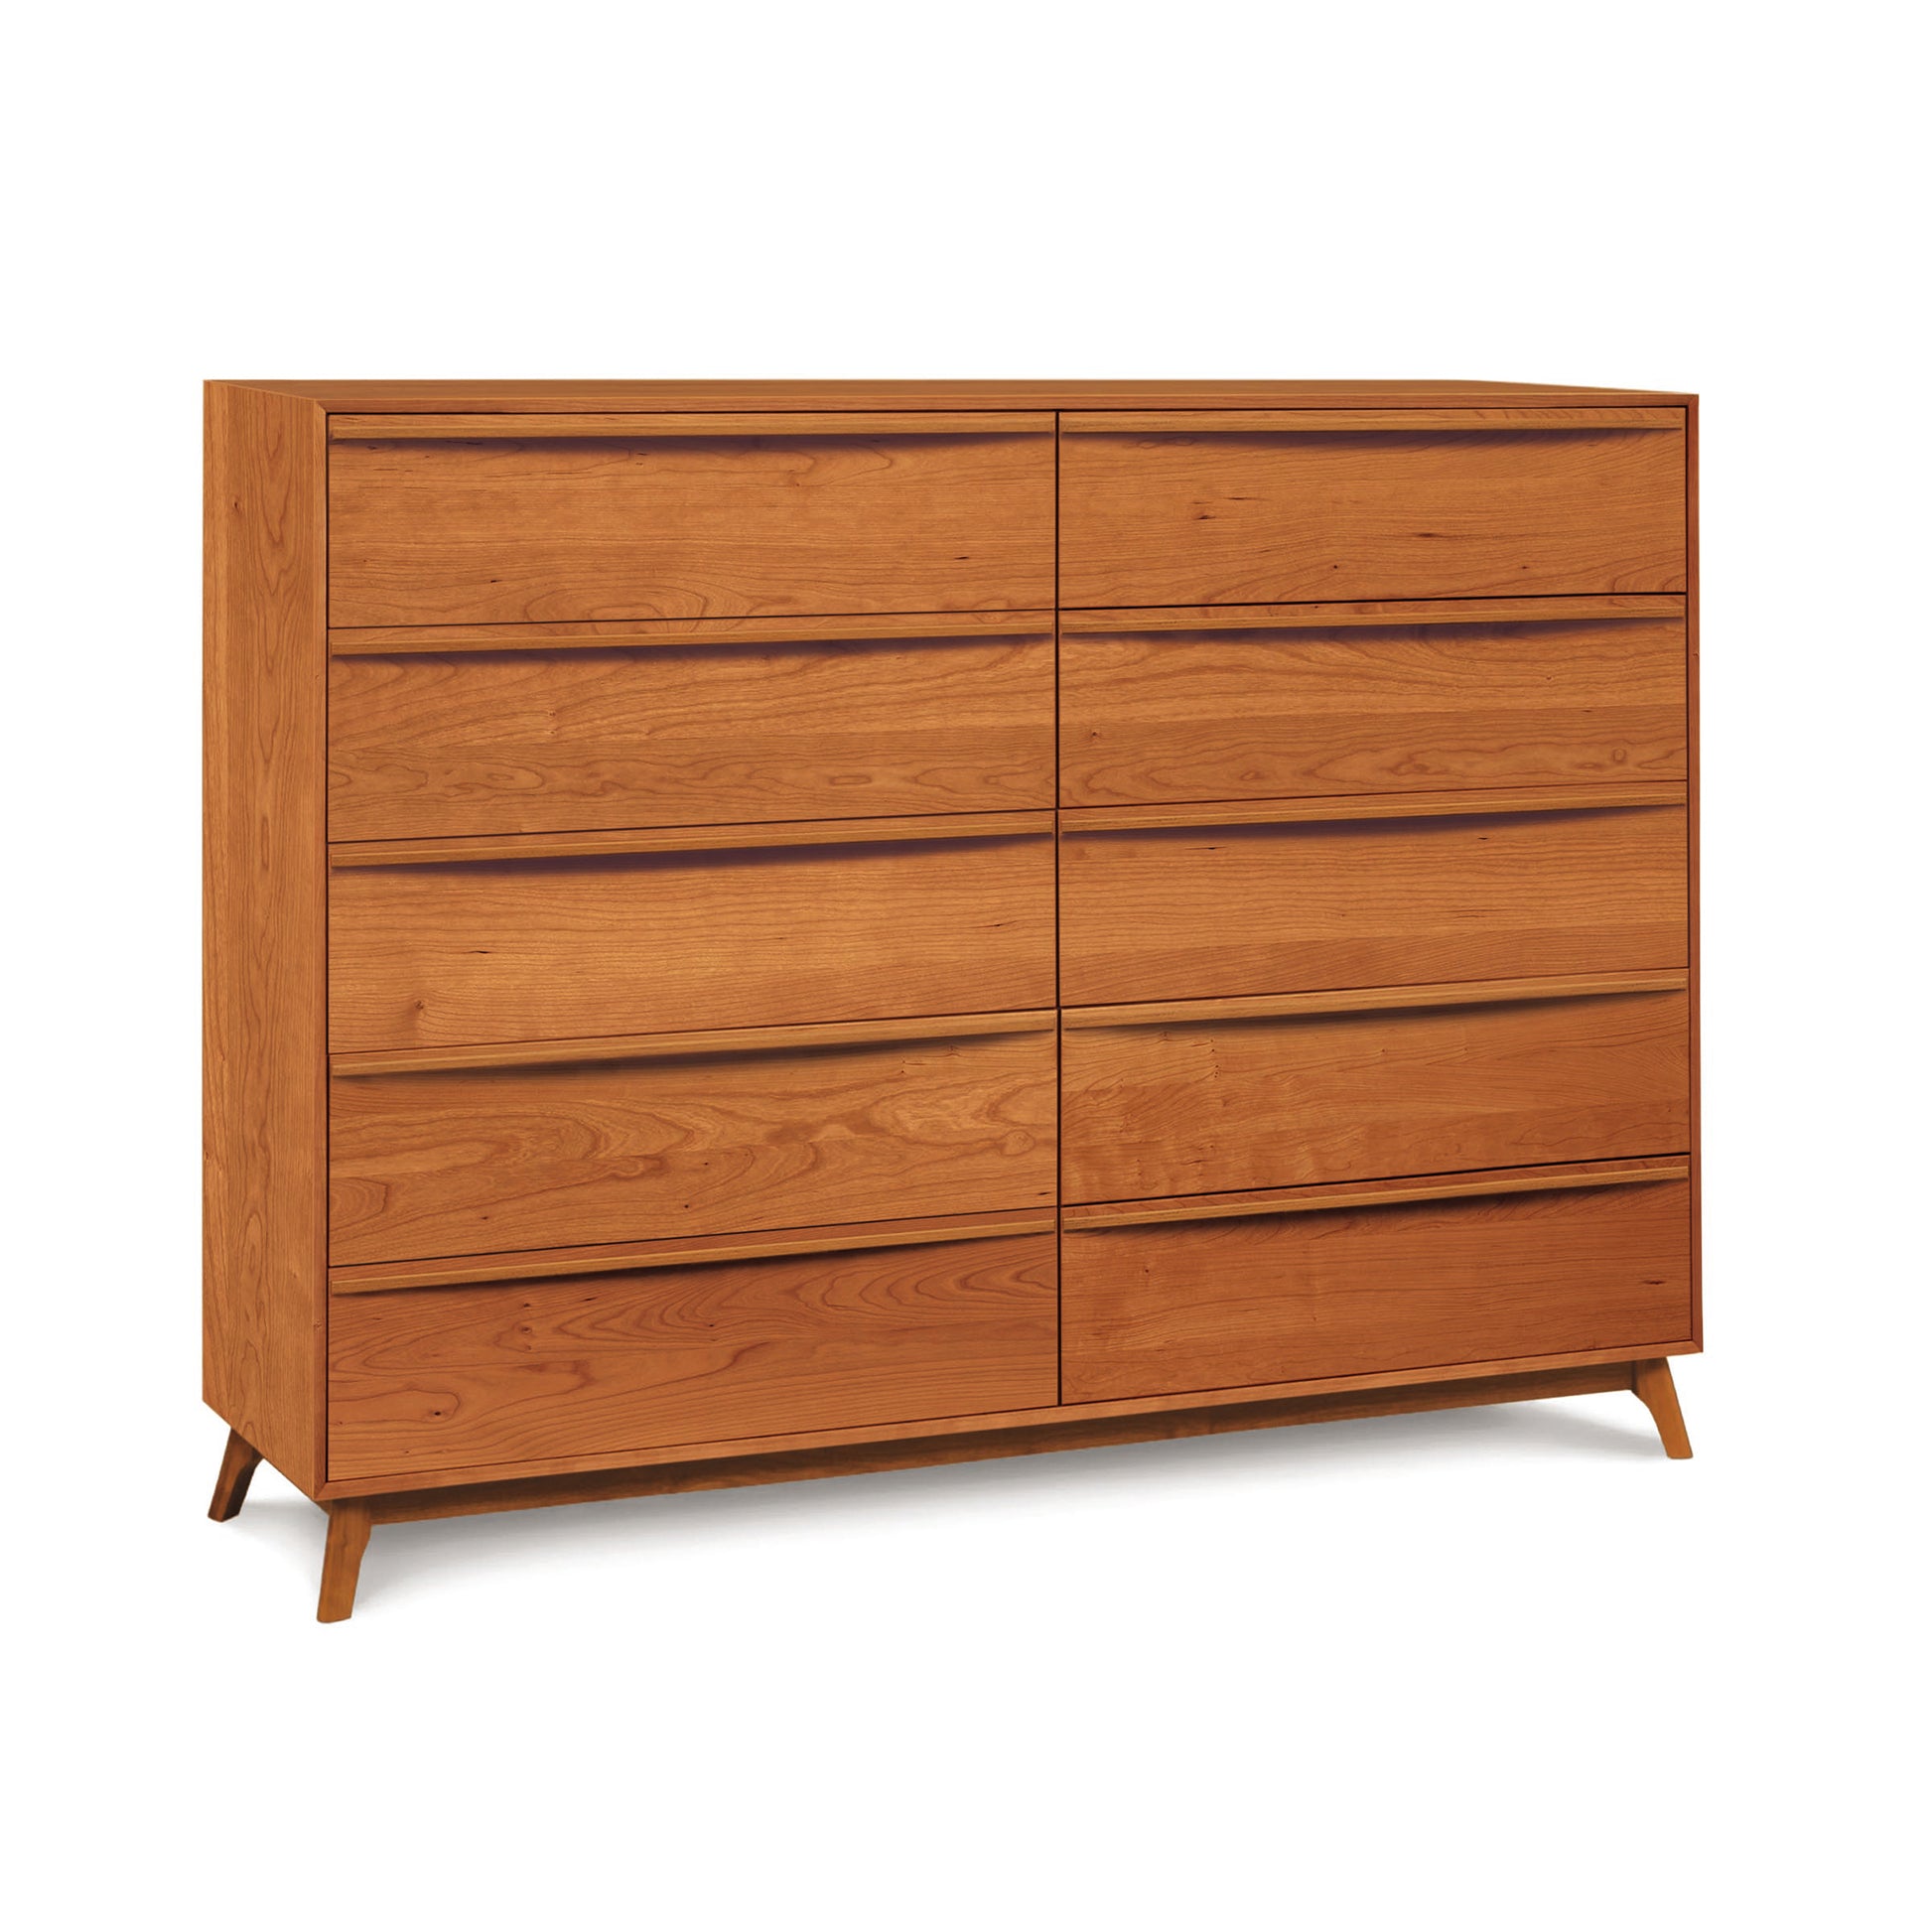 A Catalina 10-Drawer Dresser by Copeland Furniture with angled legs against a white background.